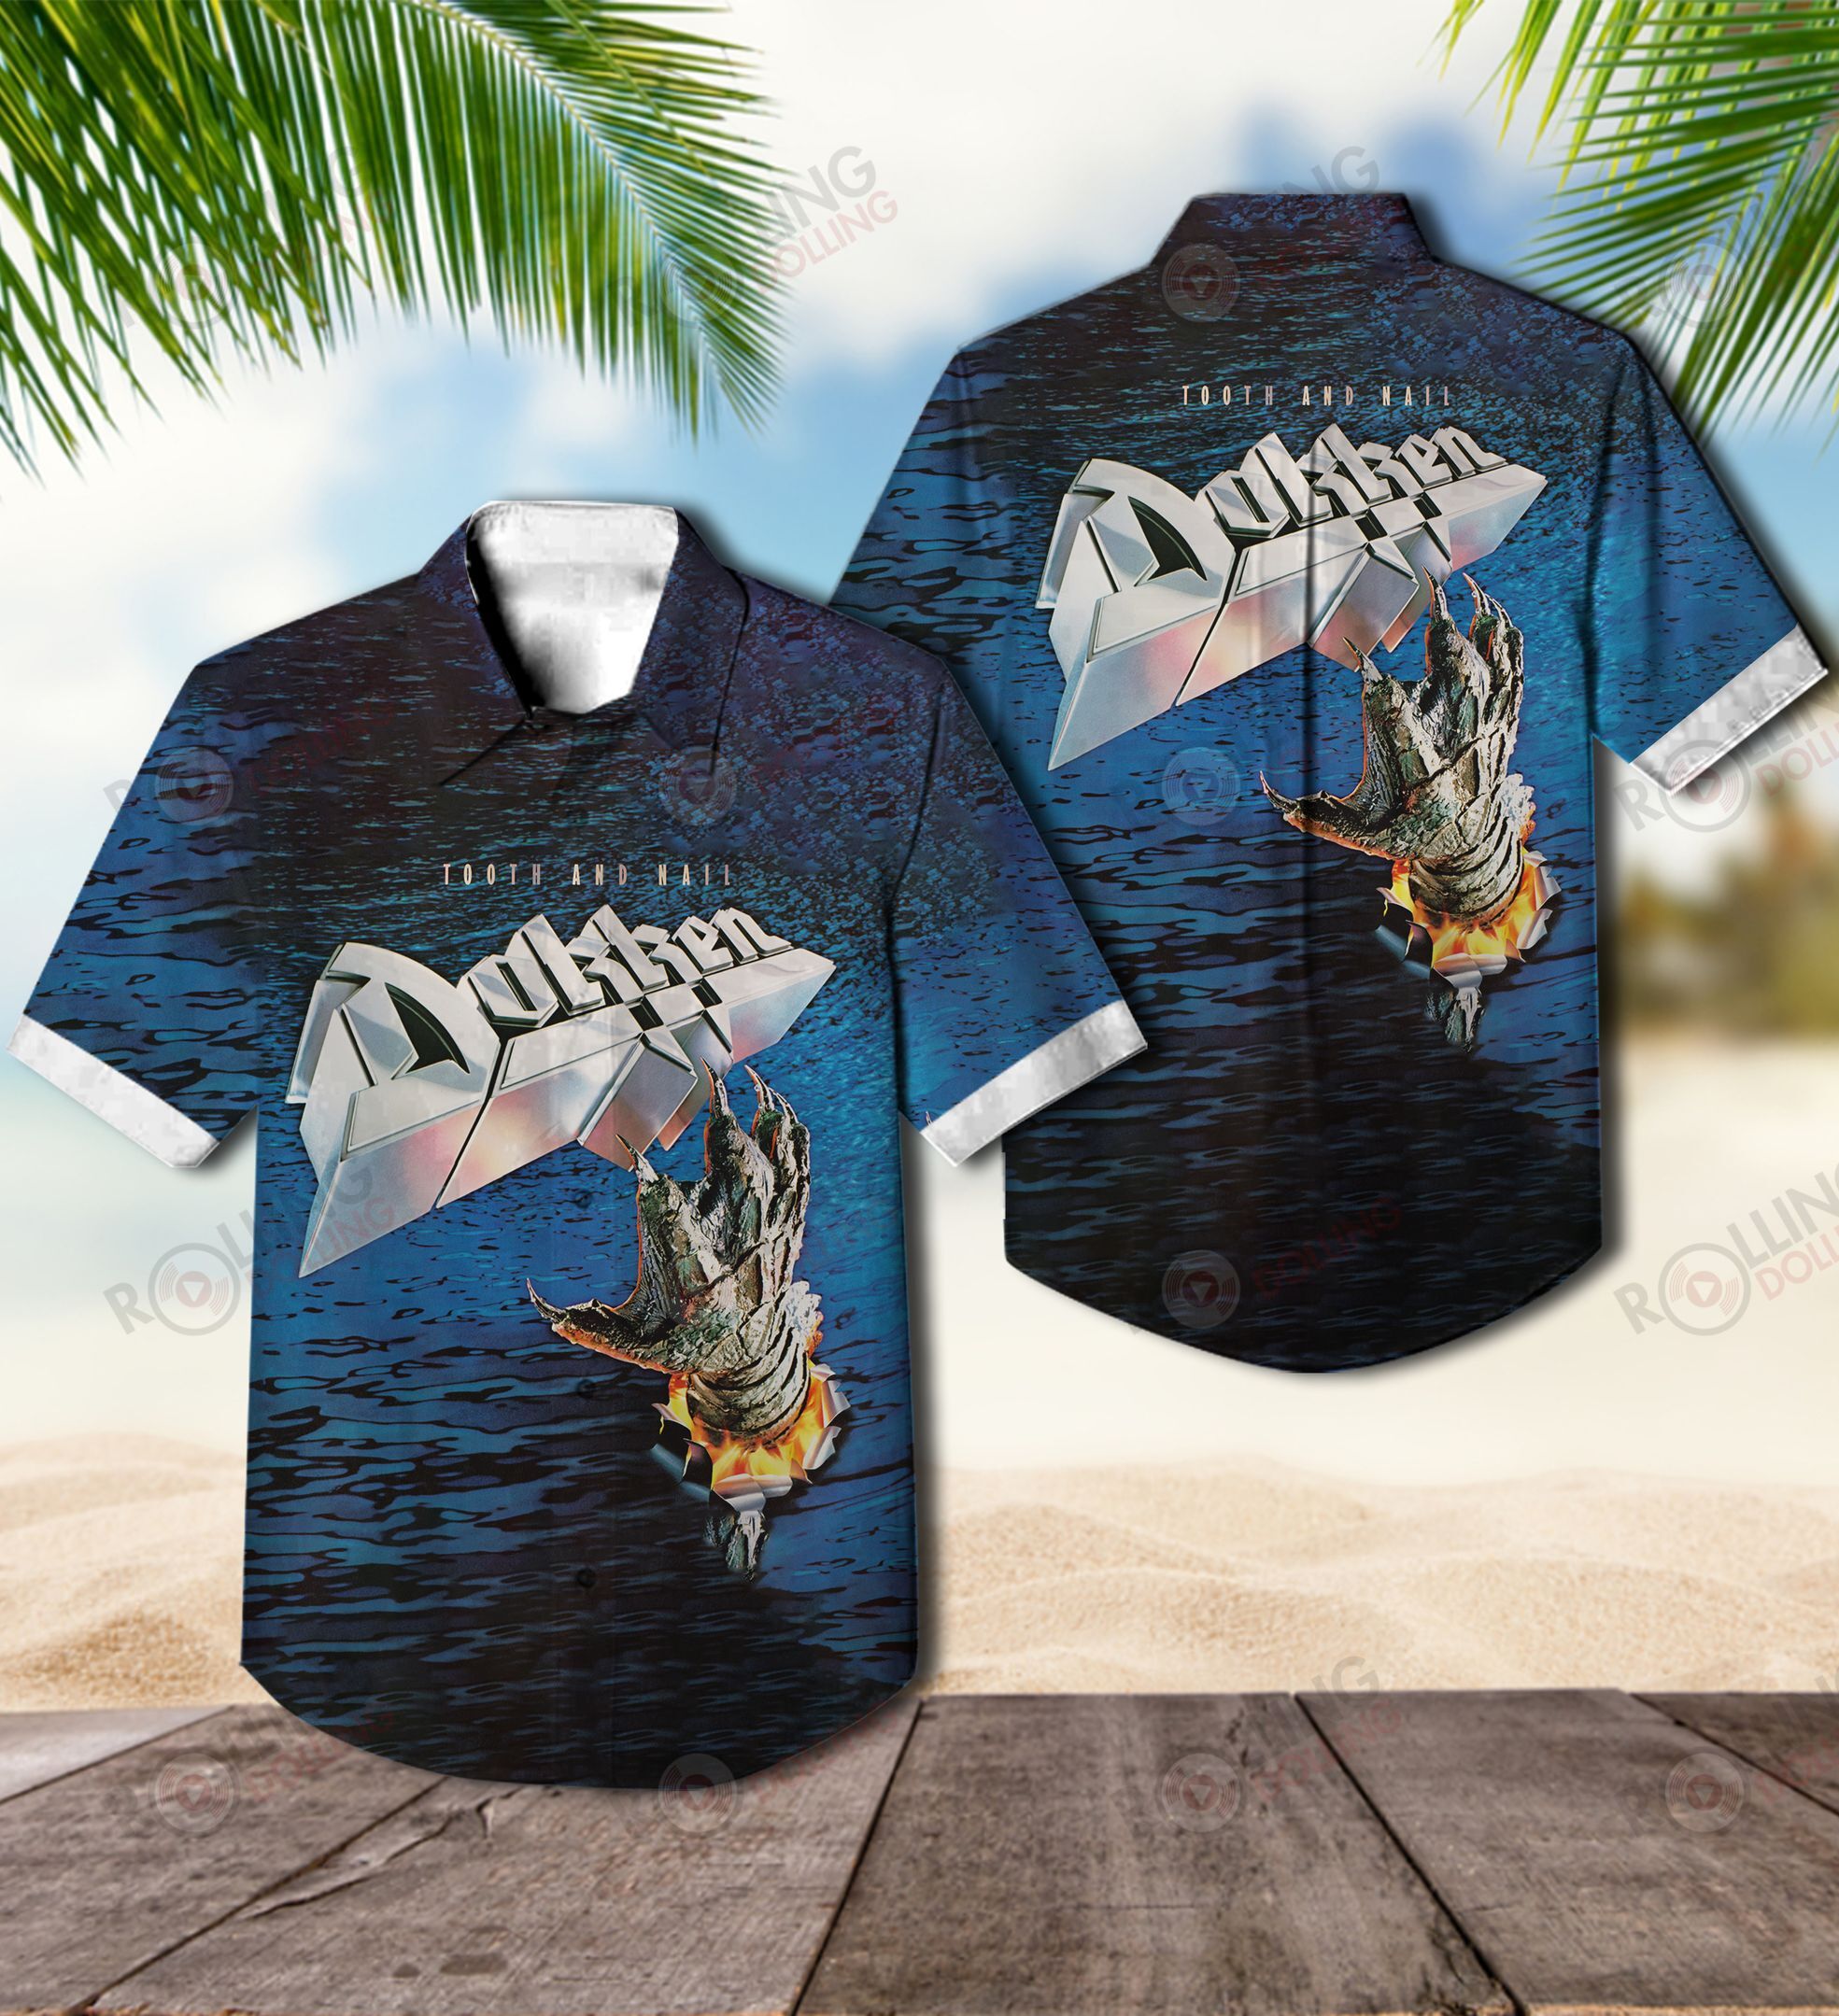 Now you can show off your love of all things band with this Hawaiian Shirt 29